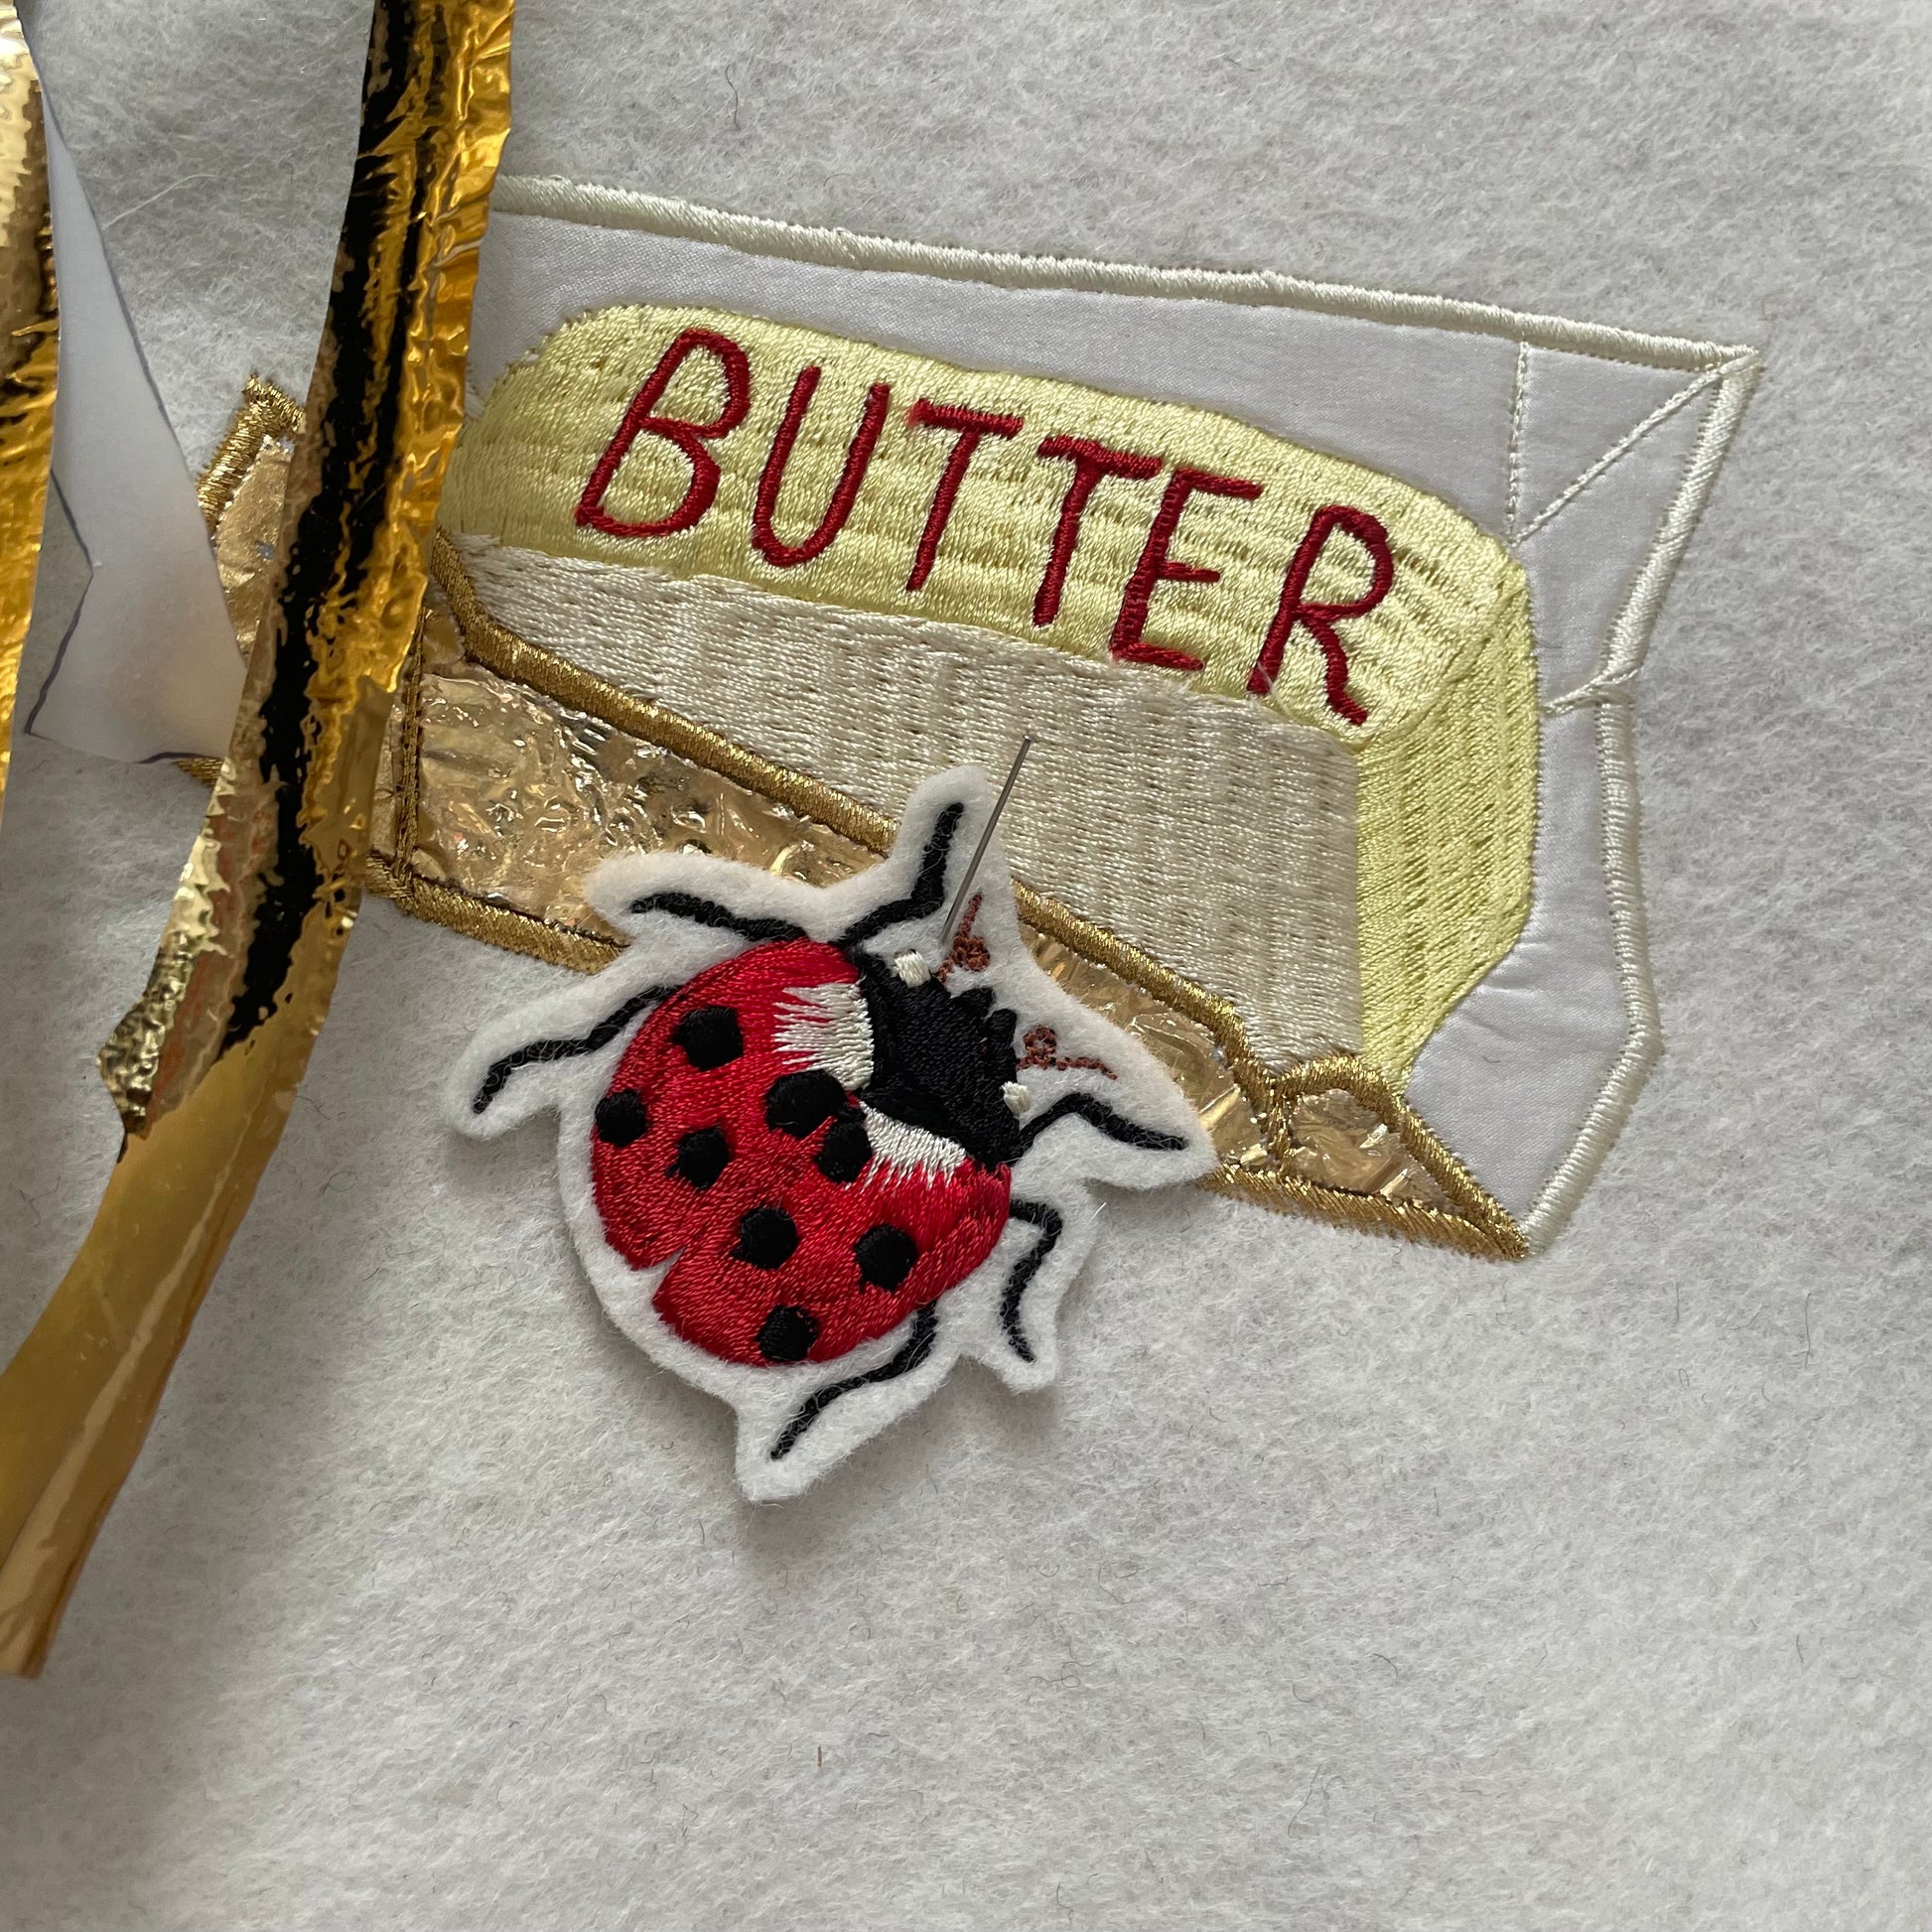 Small ladybird embroidered patch shown pinned to some embroidered artwork of butter